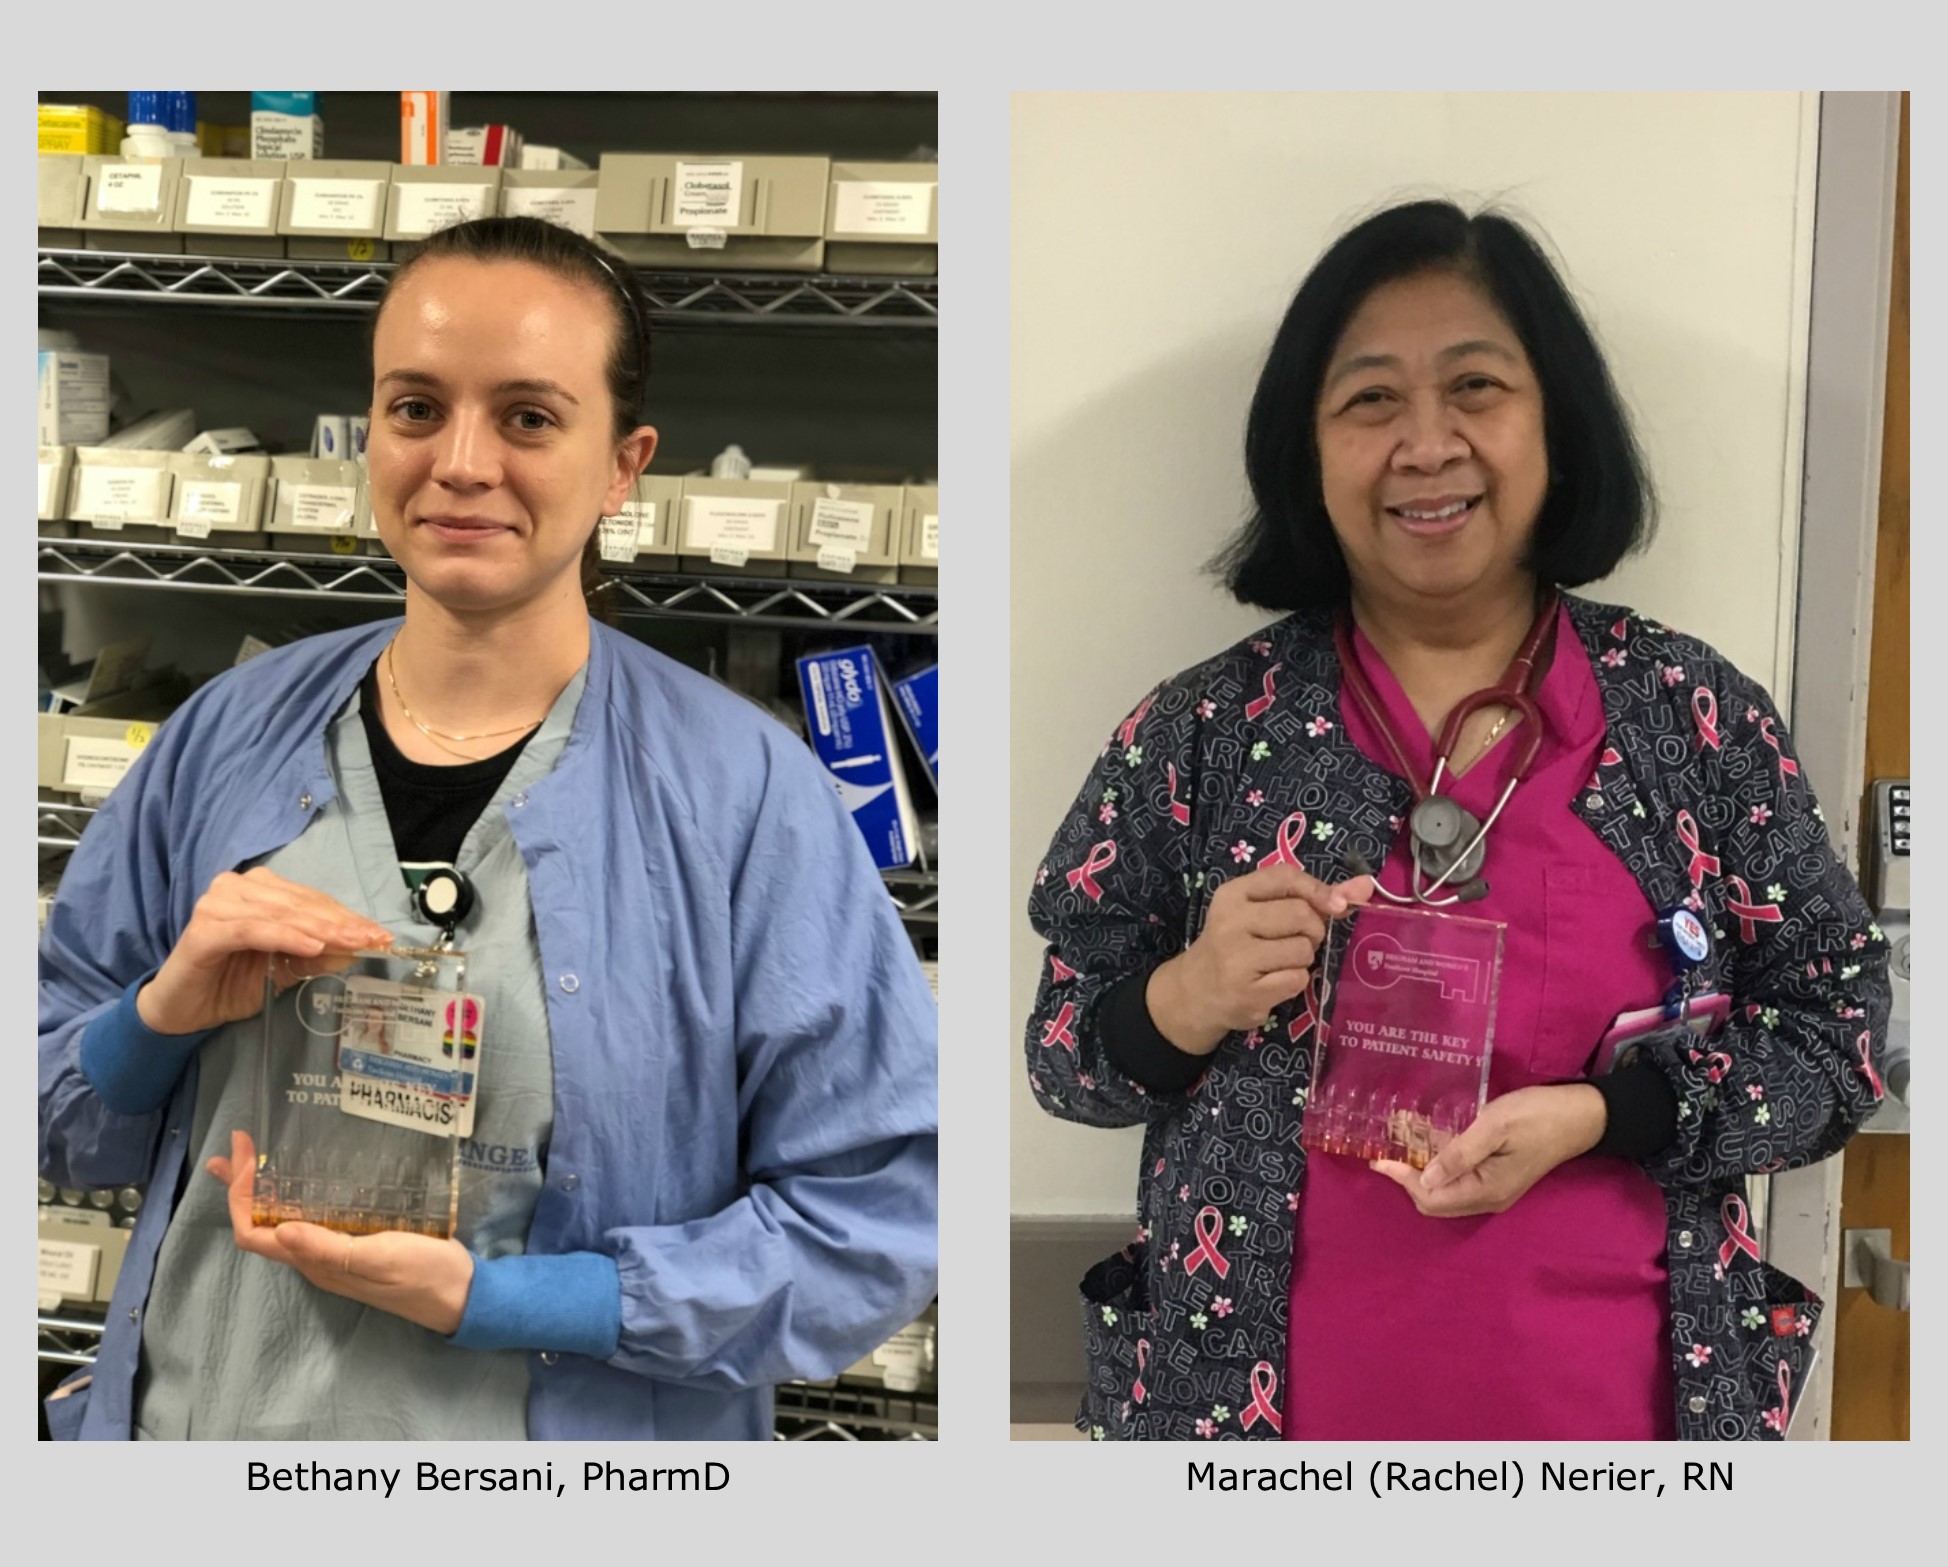 Spring 2019 Patient Safety Award Winners